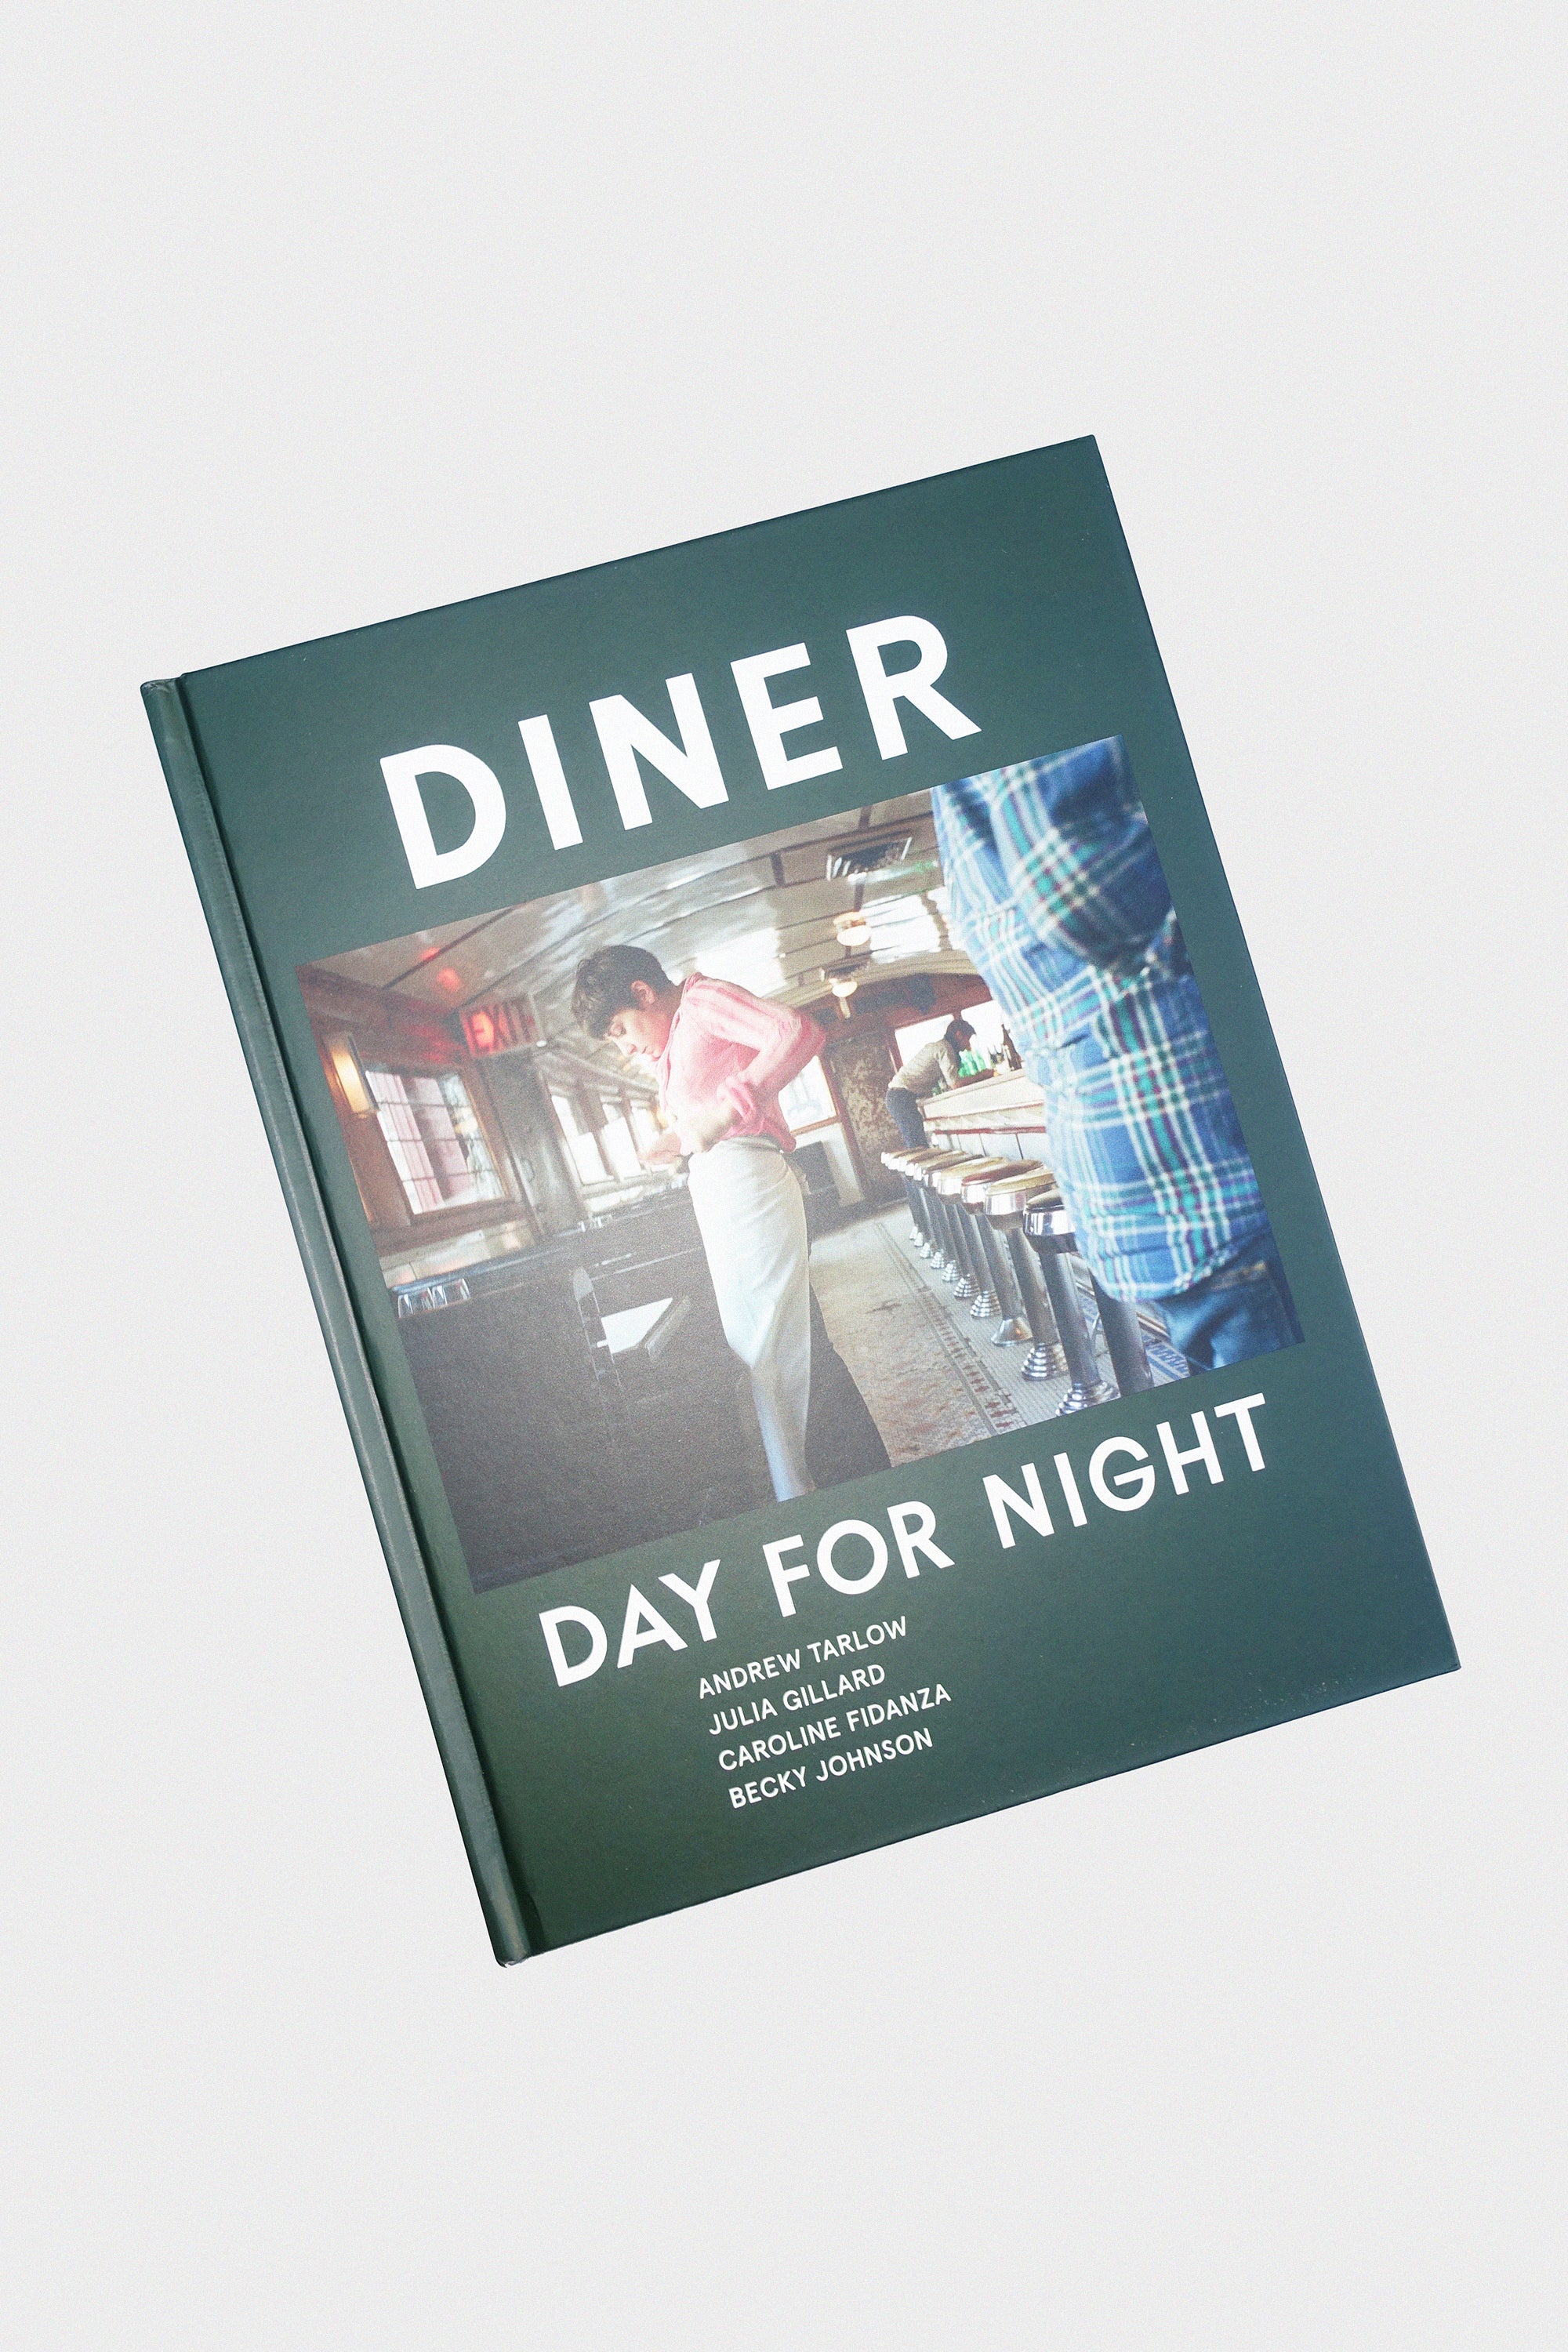 Diner: Day for Night